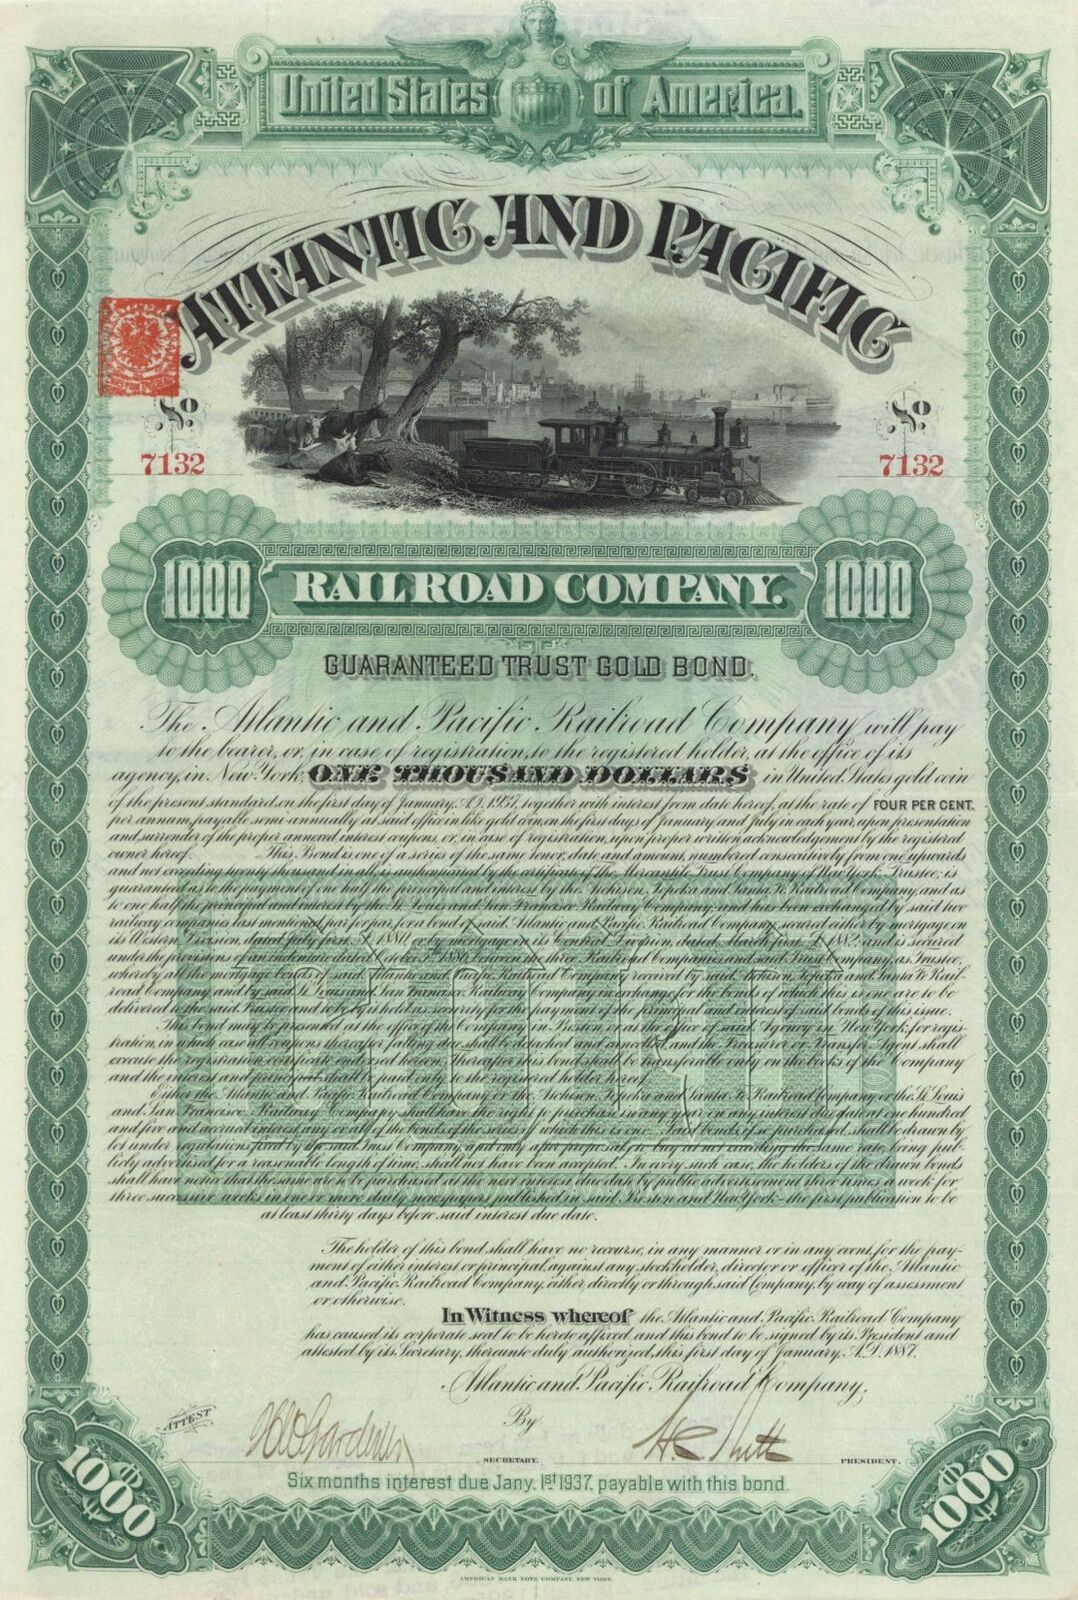 Atlantic and Pacific Railroad Co. - 1887 dated $1,000 Uncanceled Railway Gold Bo